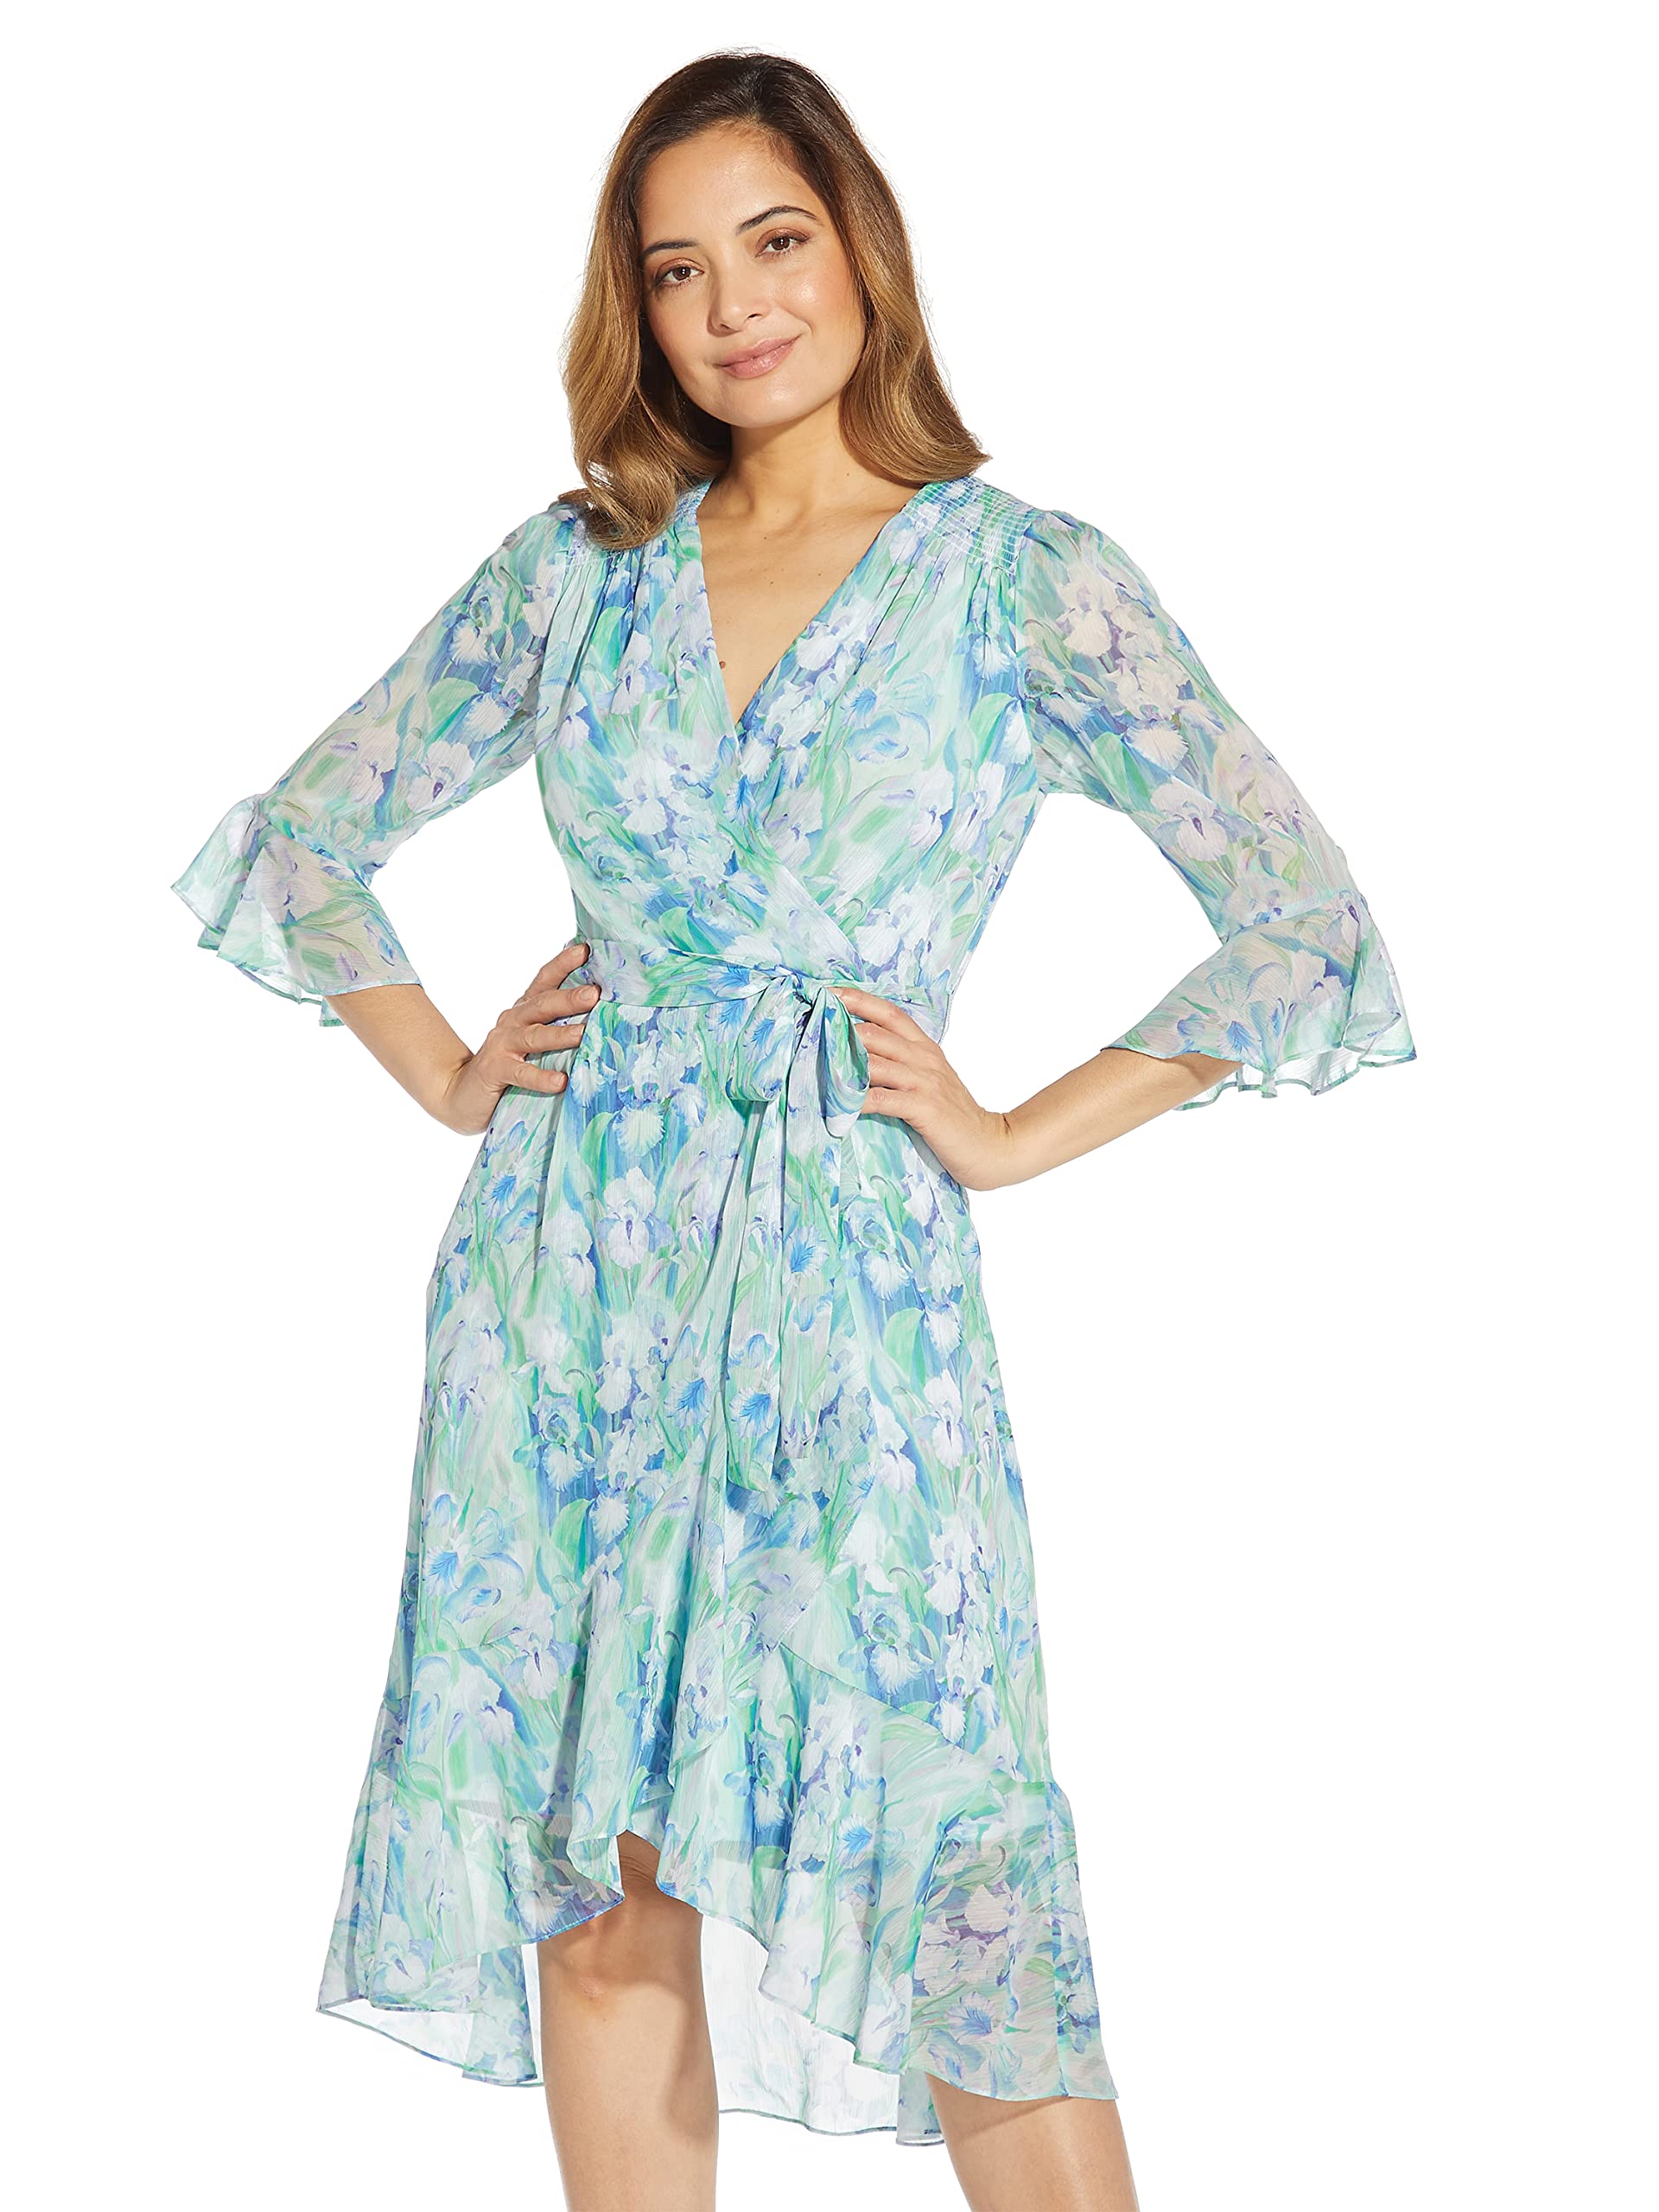 Adrianna Papell Women's Printed Chiffon Short Dress with Three Quarter Bell Sleeves